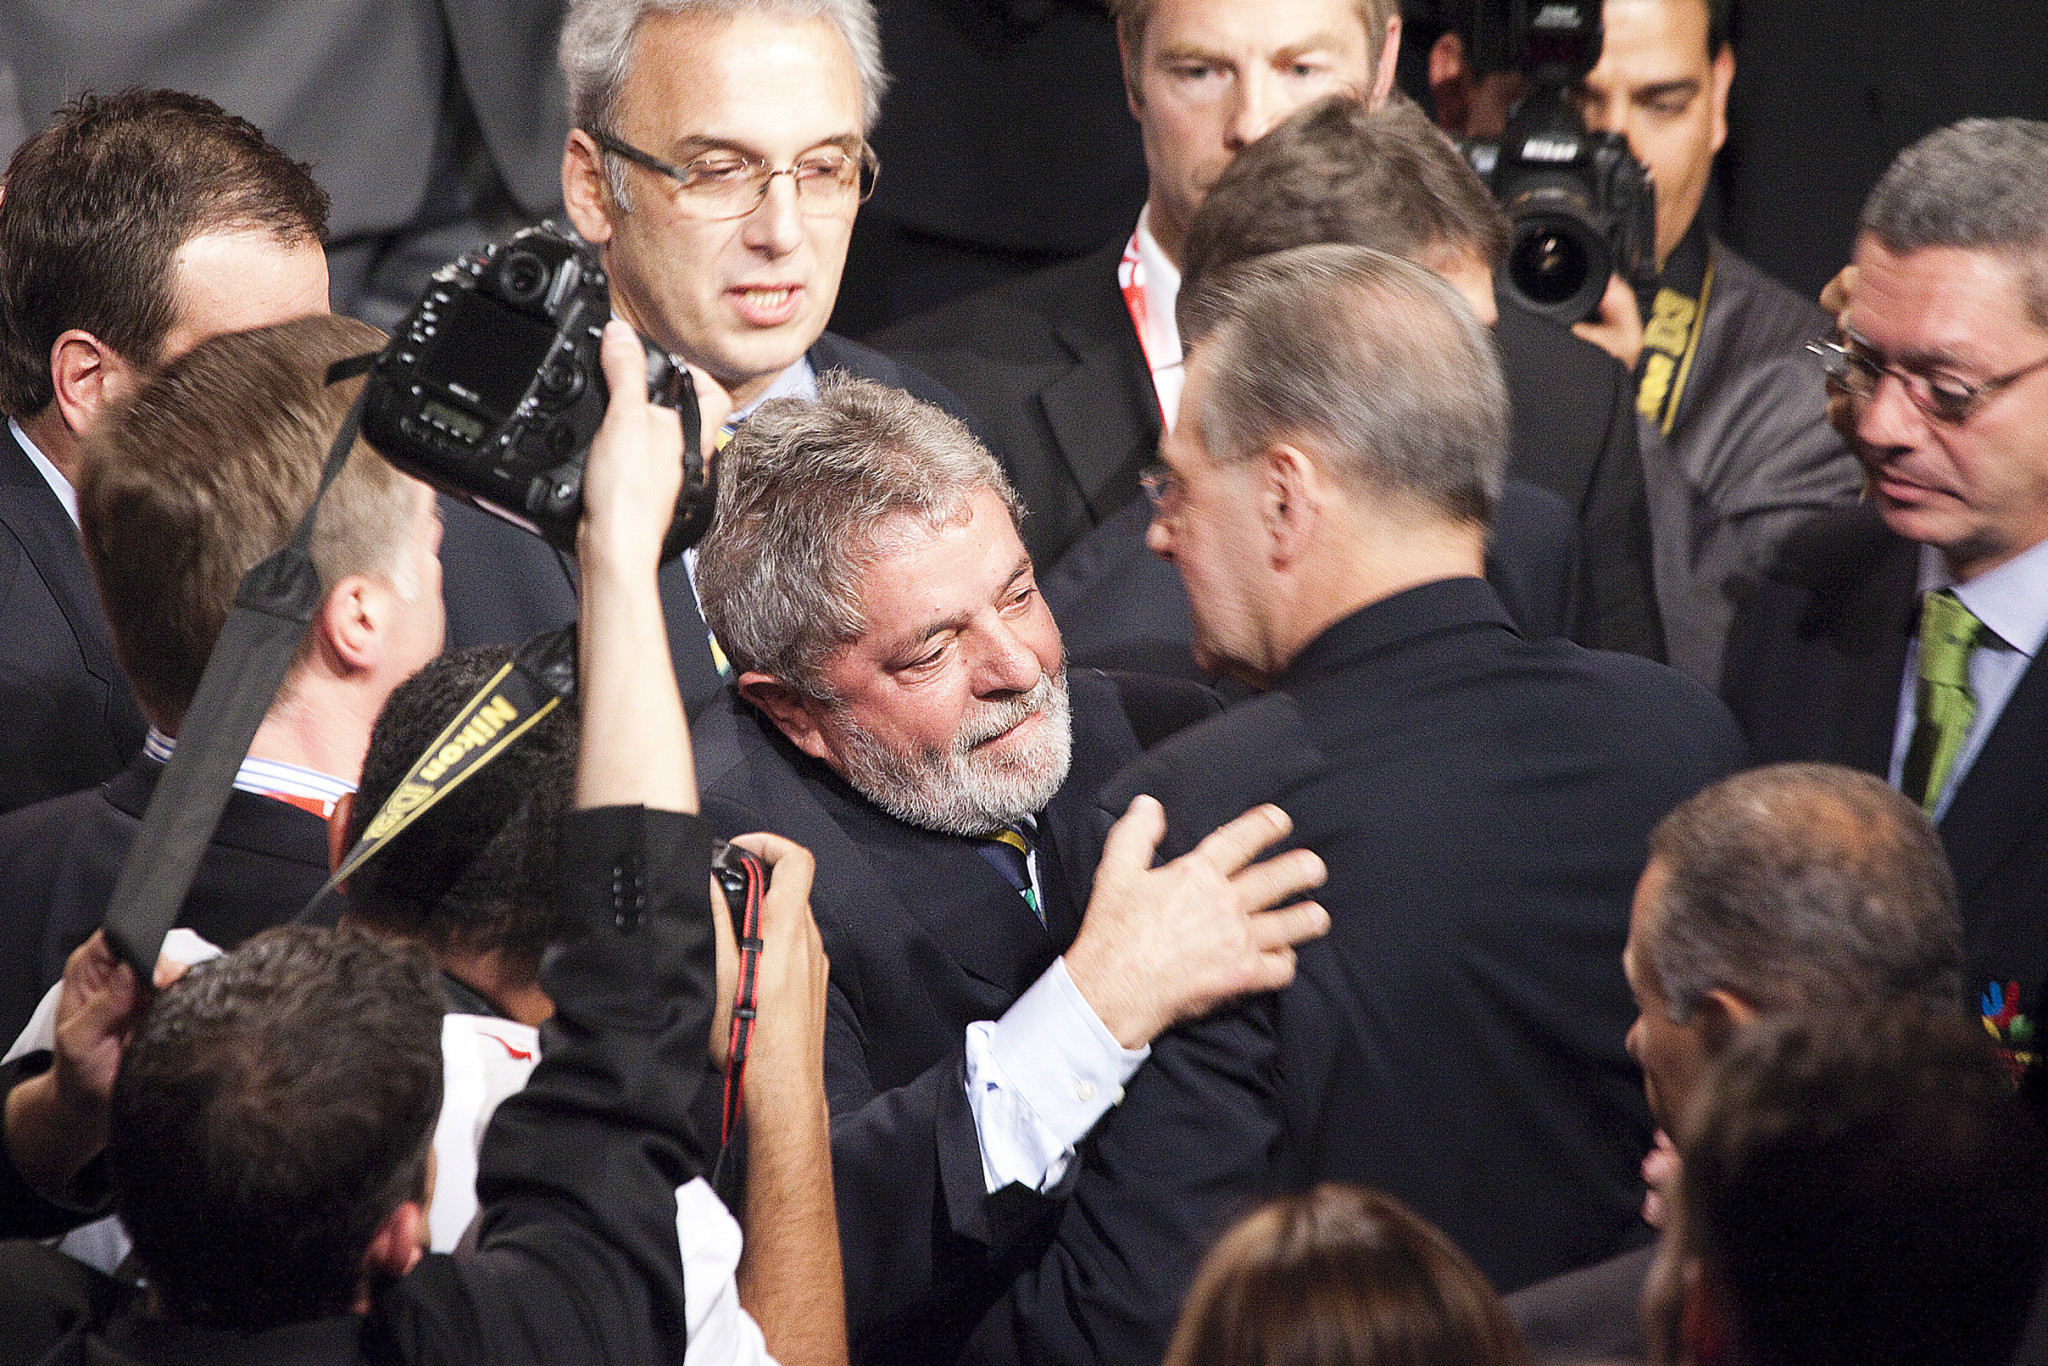 Luiz Inacio Lula da Silva, left, pictured embracing then-IOC President Jacques Rogge after Rio was awarded the Olympics in 2009 ©Getty Images